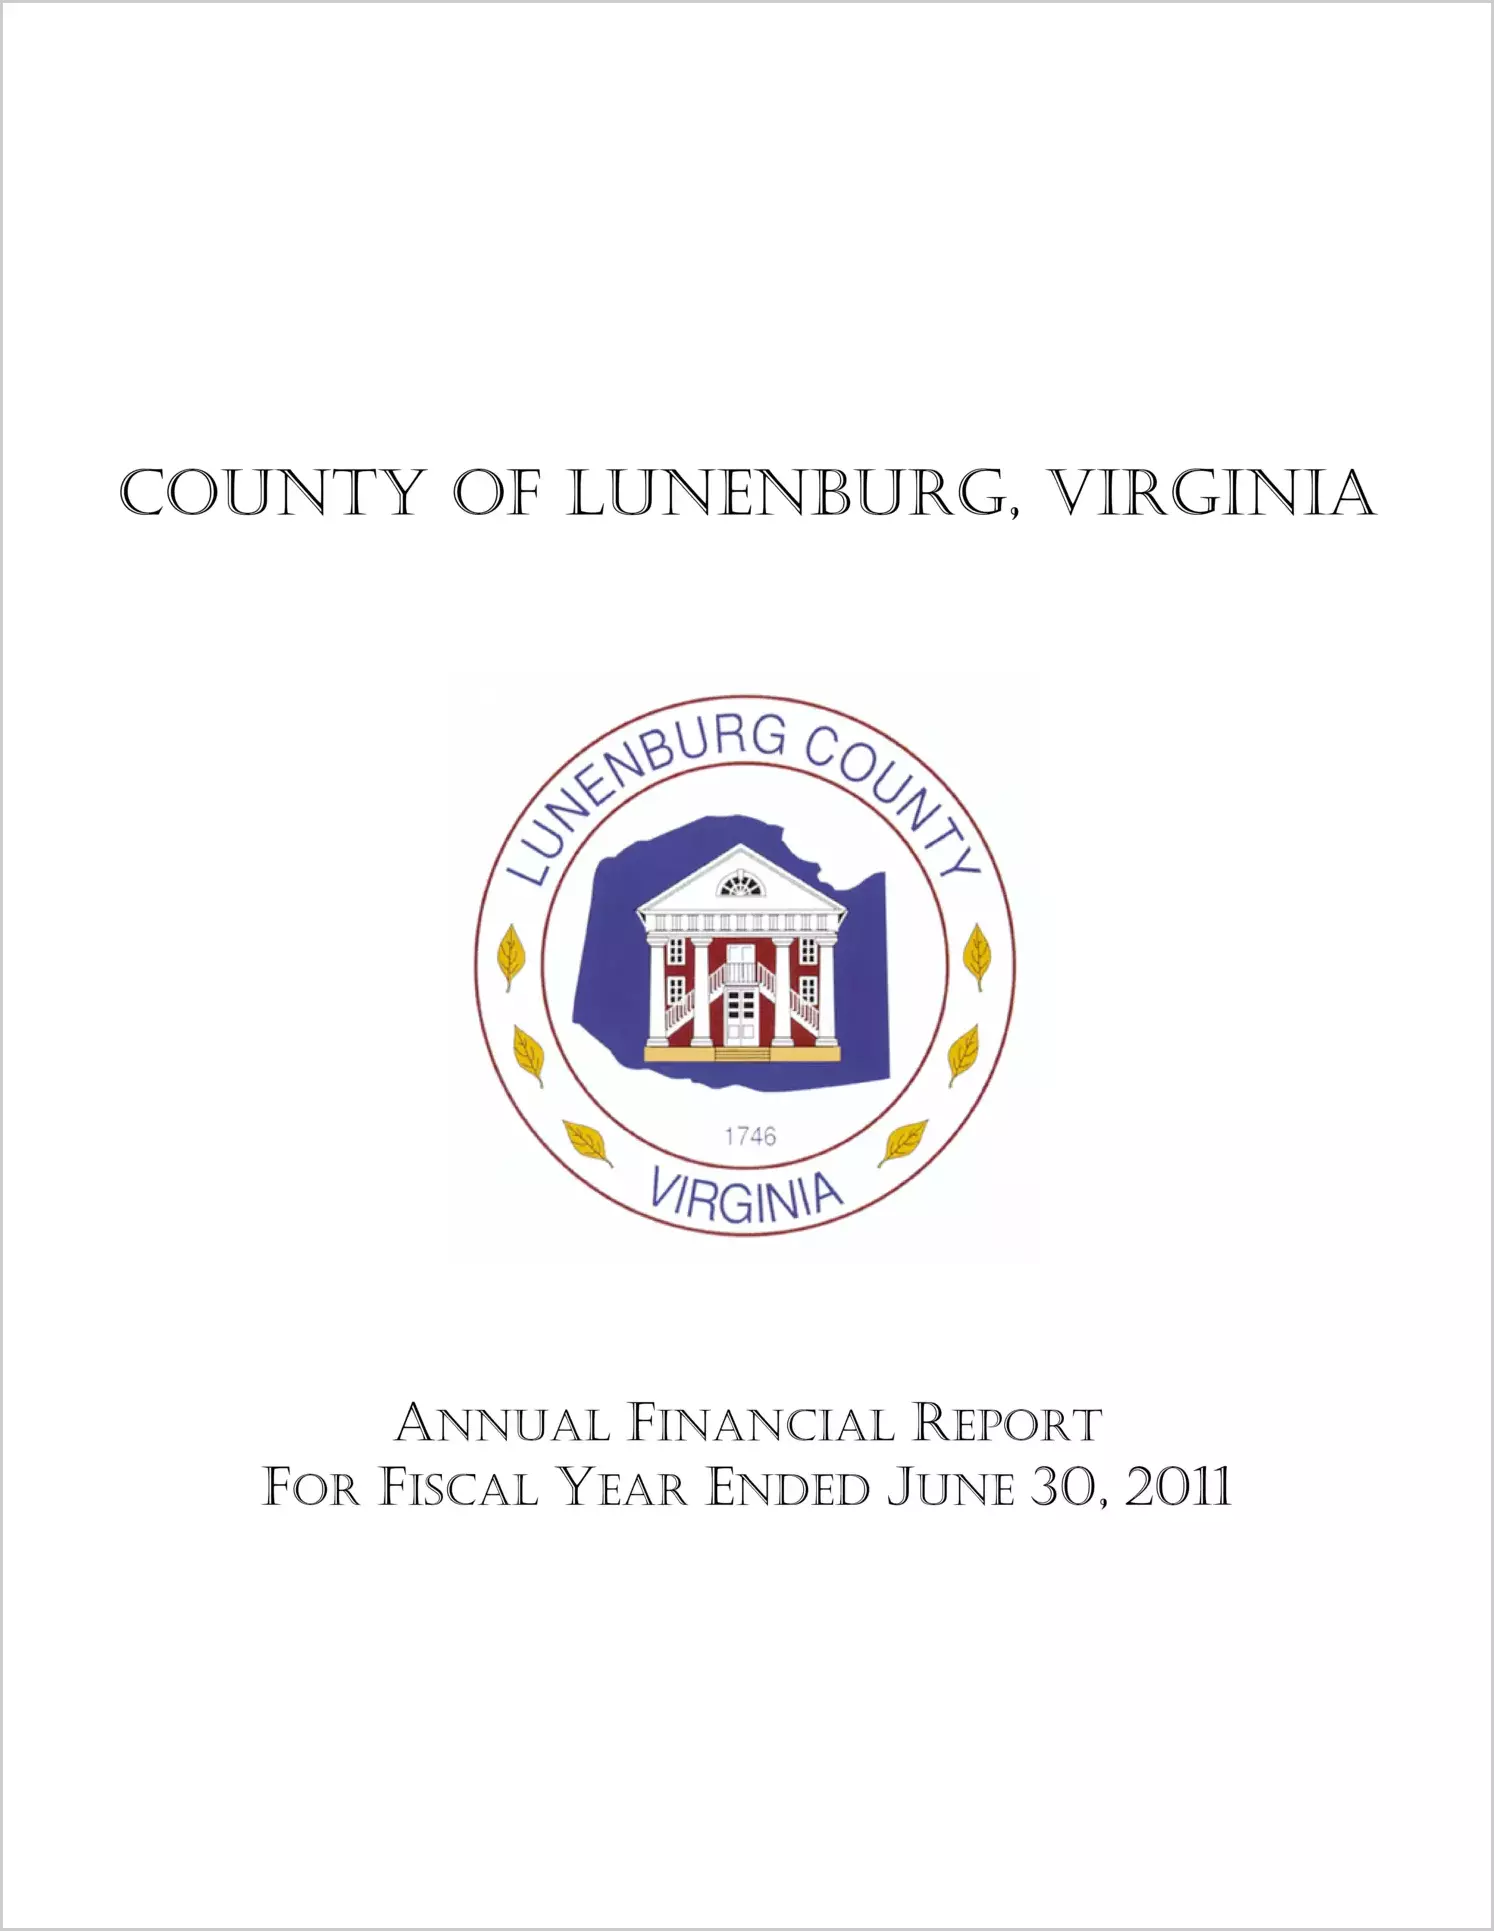 2011 Annual Financial Report for County of Lunenburg